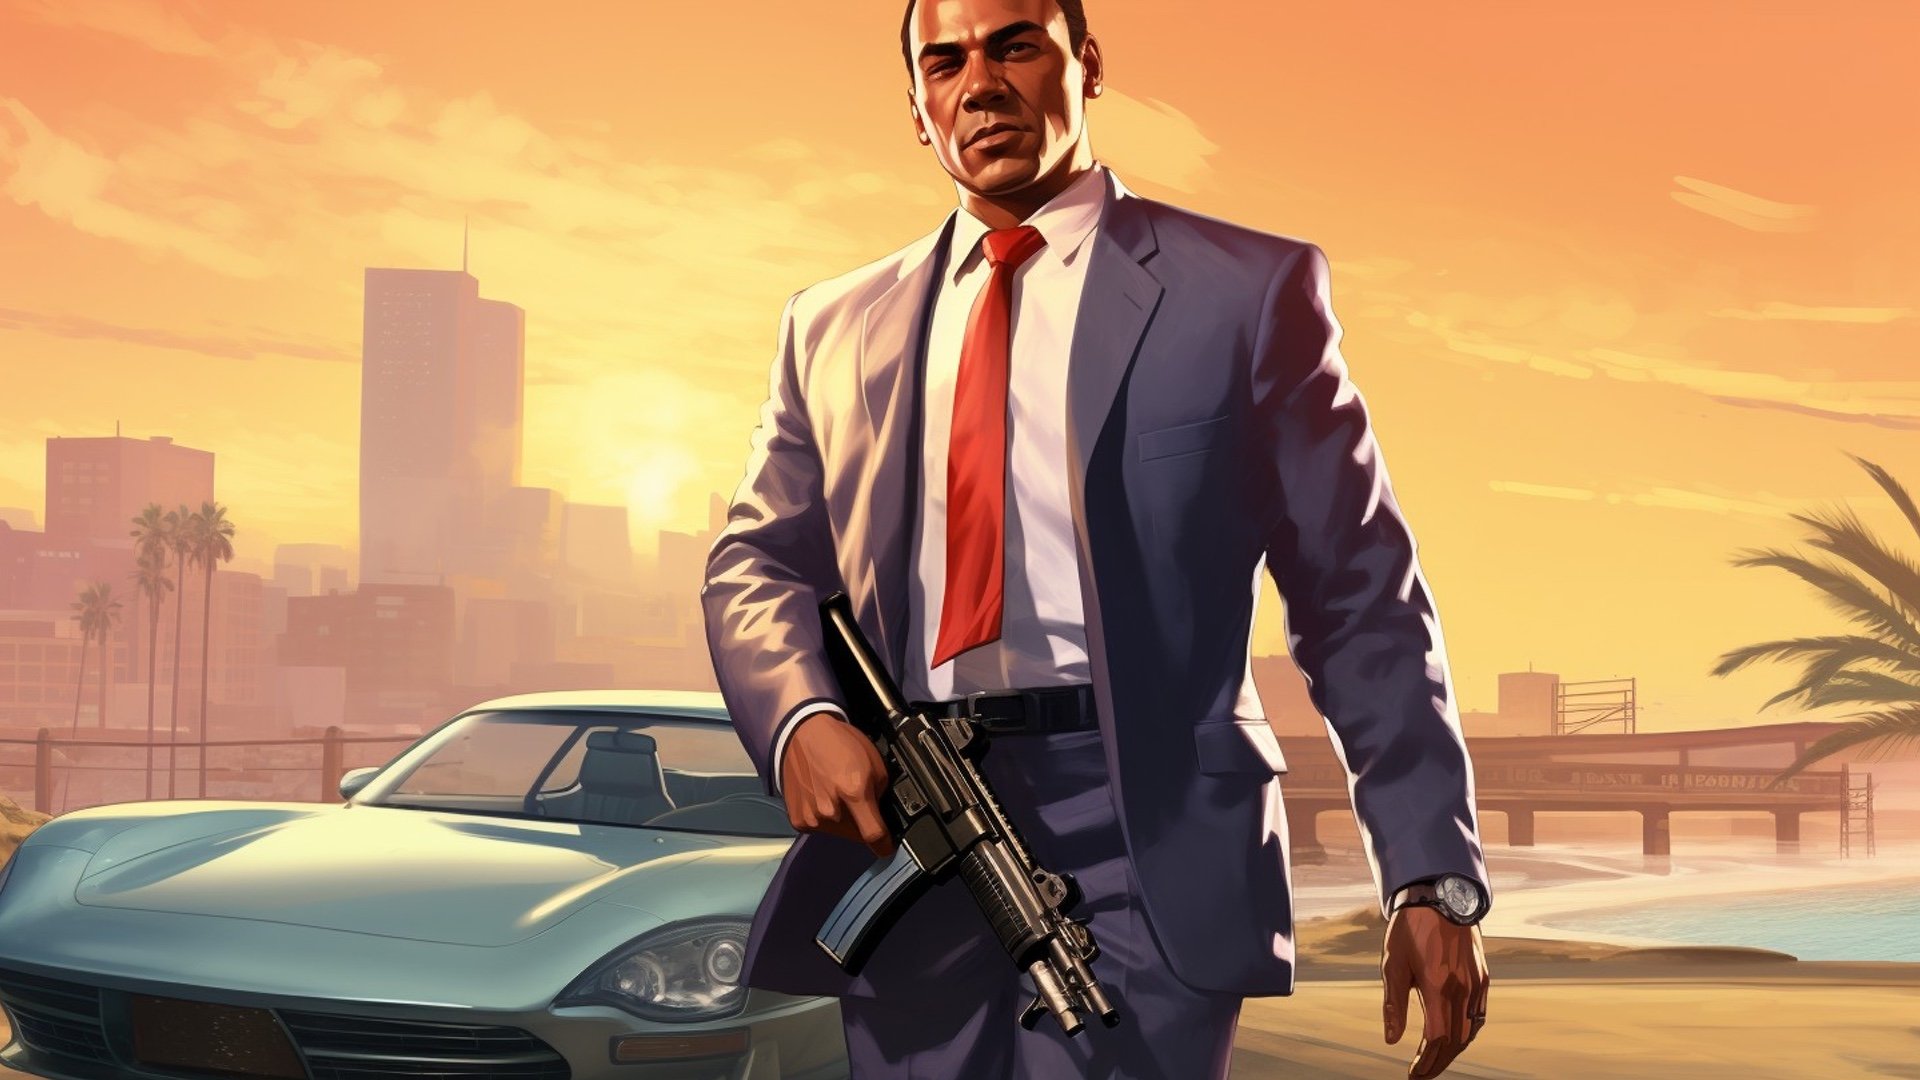 Rockstar reveal GTA 6 trailer release date and time in teaser image